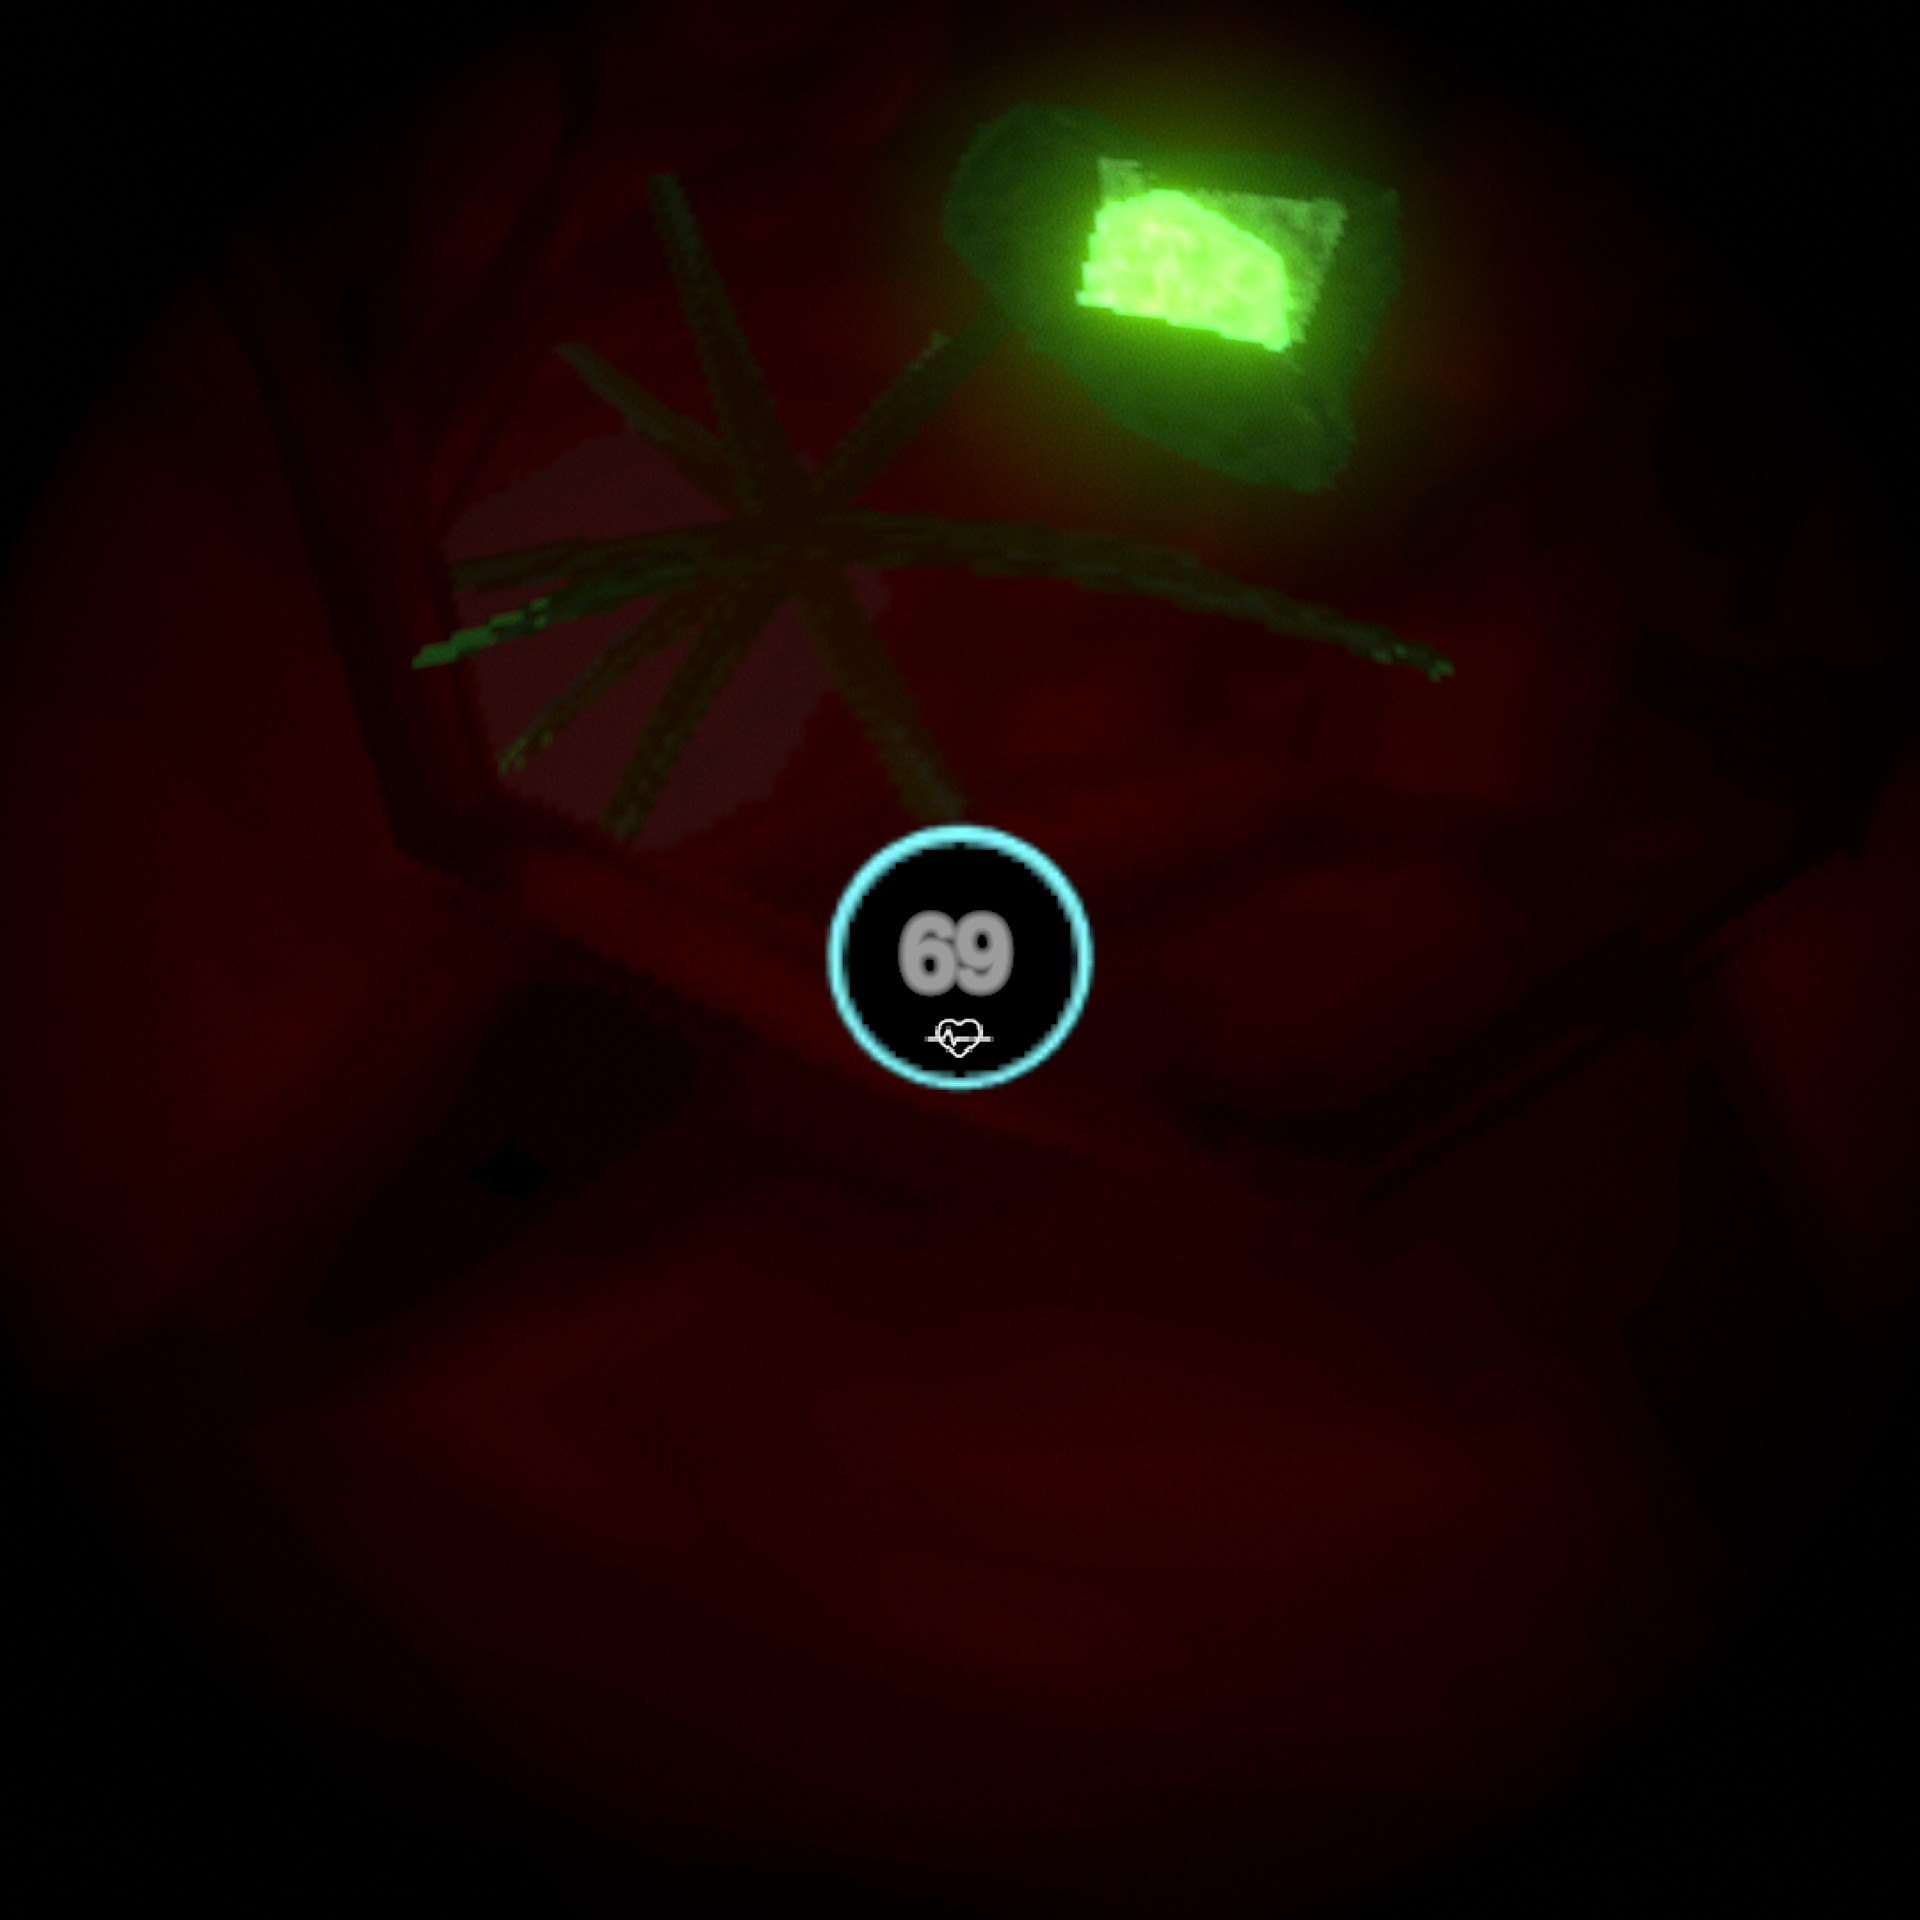 A first-person perspective from inside a dark, low resolution red tunnel. There is a user interface on the center encircled by a blue cirble, and contains the number 69 and a small white heart icon. Further down the tunnel is a green spike ball with long spikes that reaches the width of the tunnel. Slightly closer is another spherical green shape with a bright green glowing center that's exposed at the front.